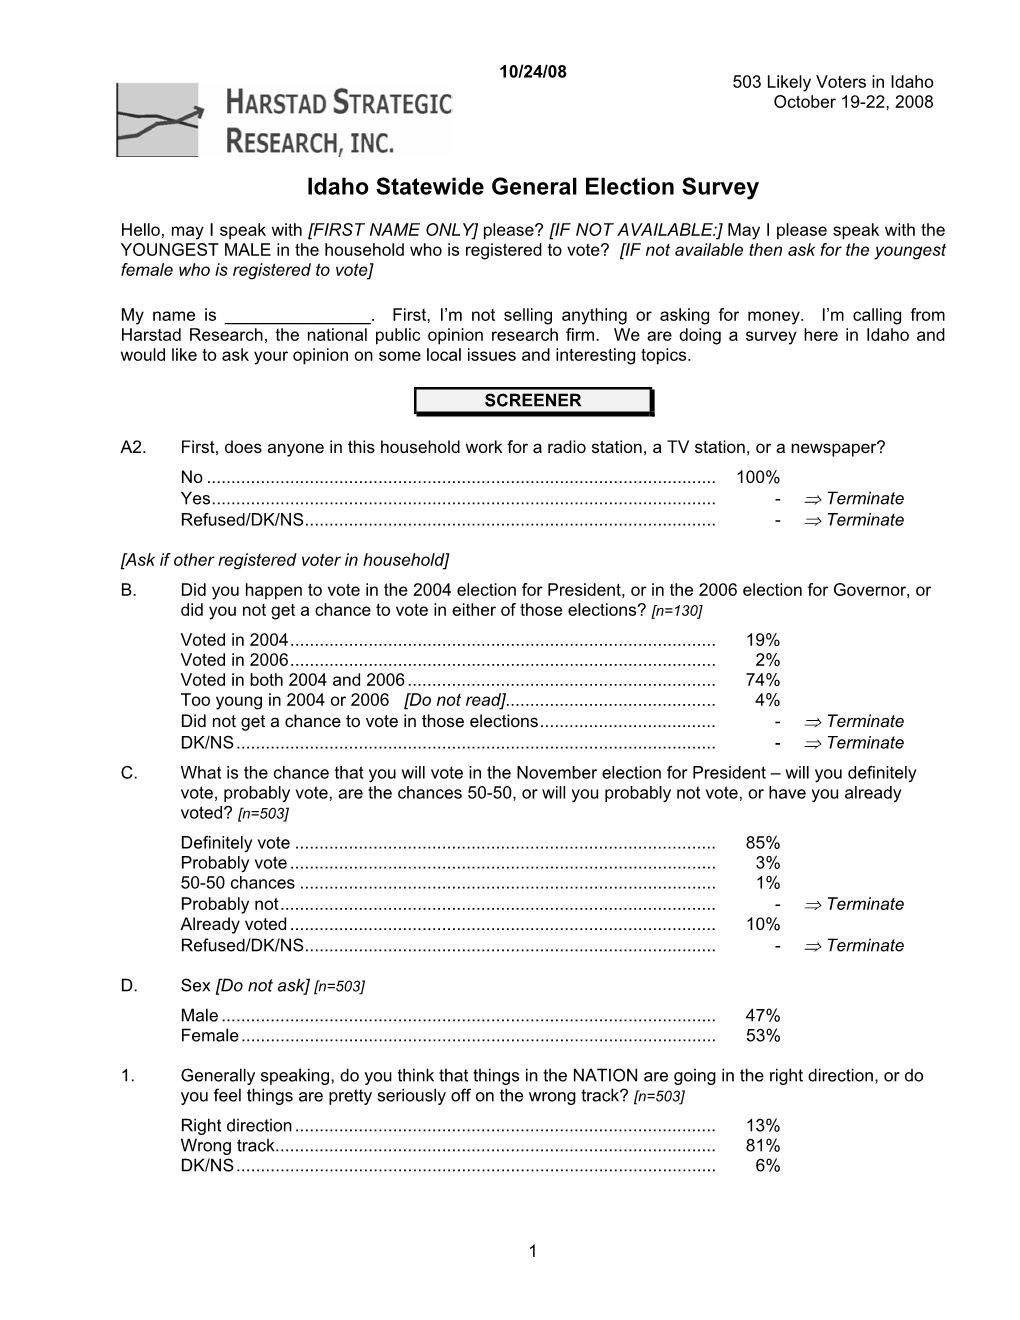 Idaho Statewide General Election Survey